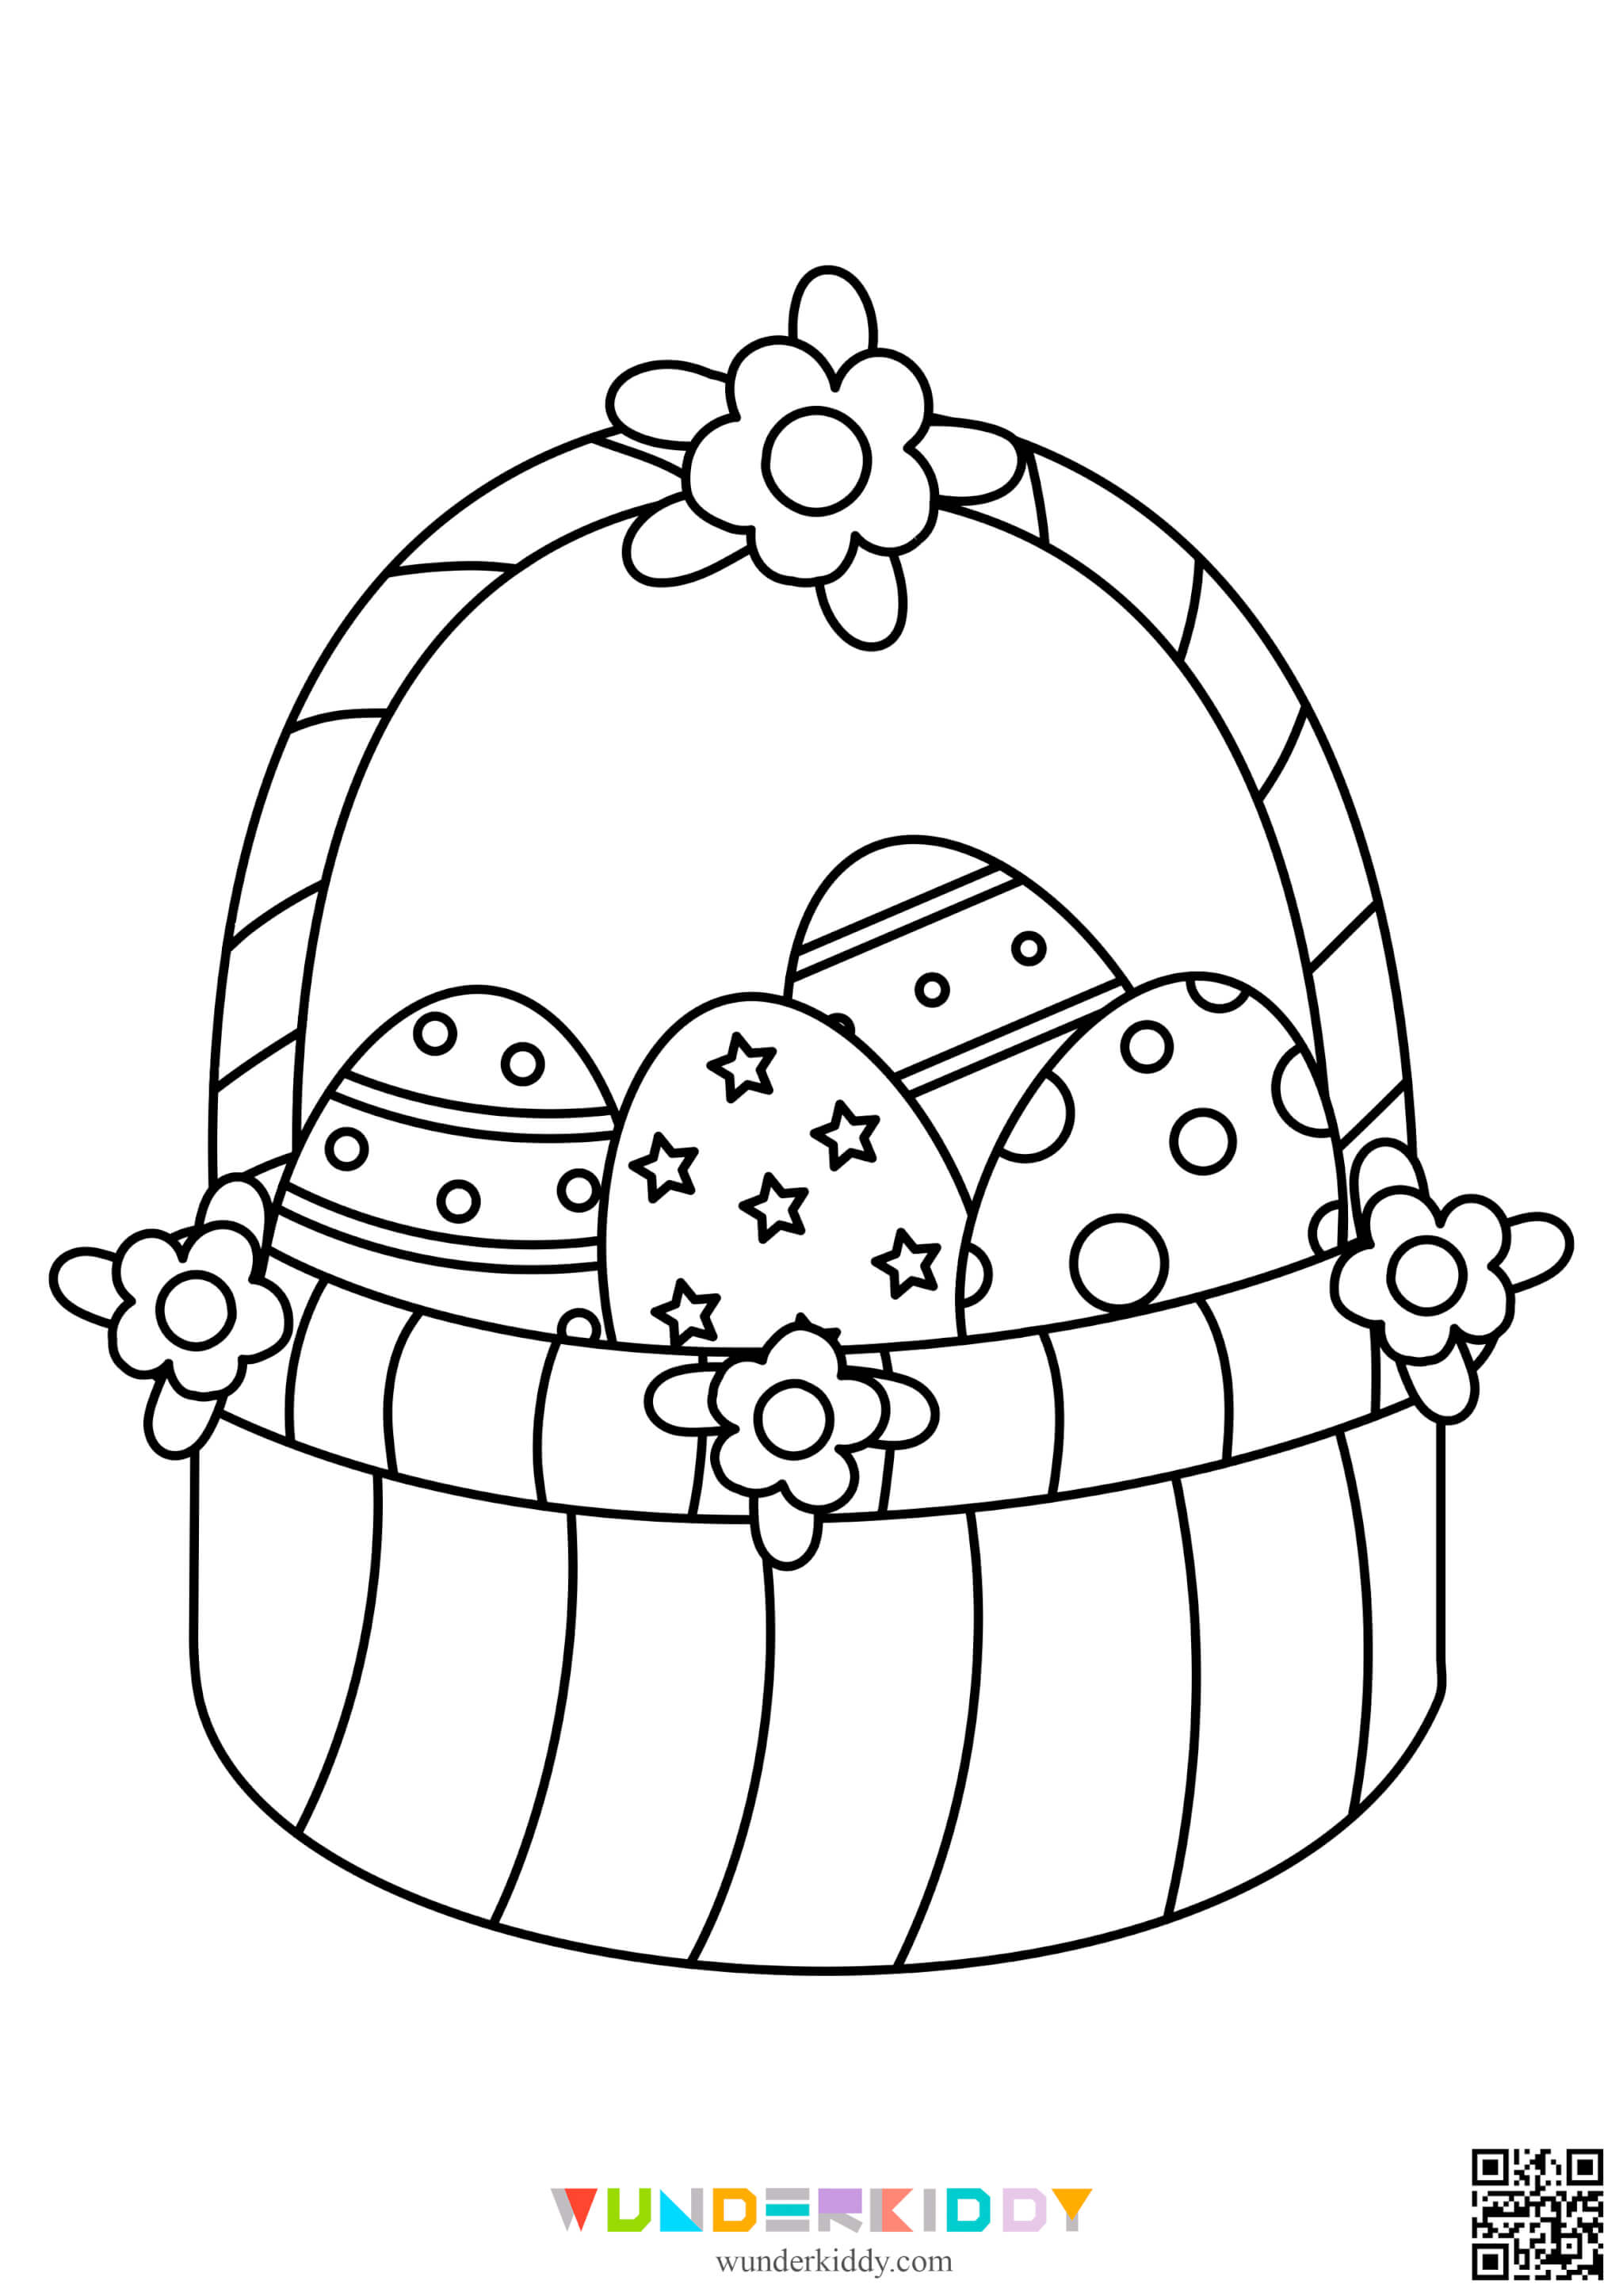 Easter Eggs Coloring Pages - Image 13